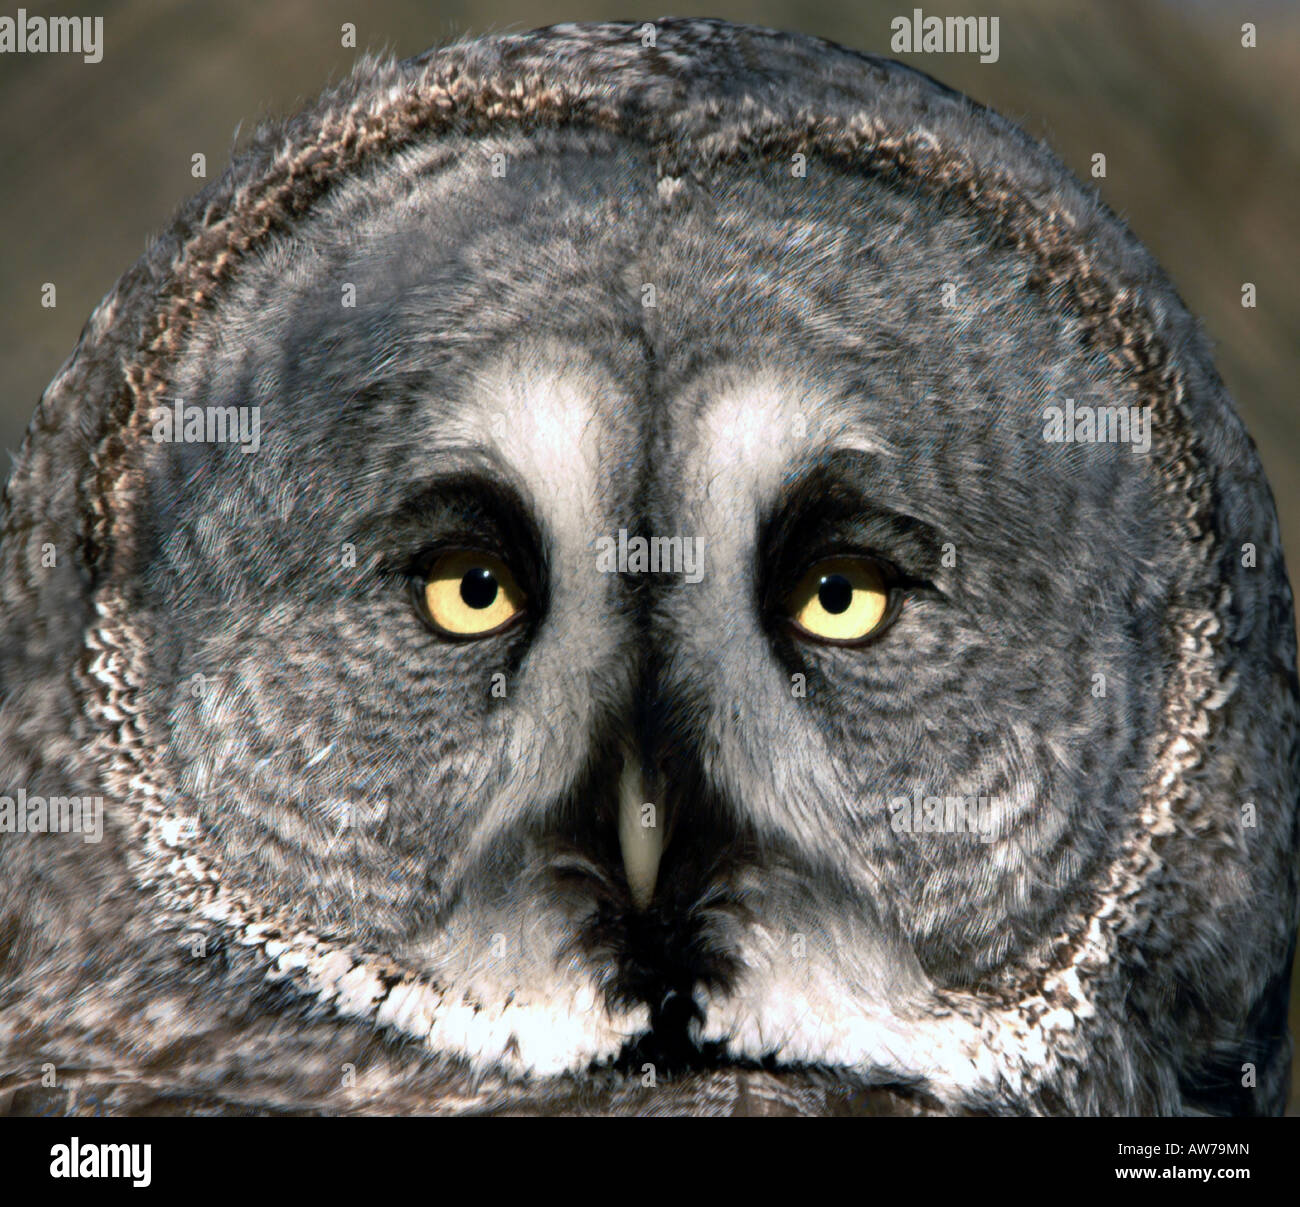 The face of a great grey owl Stock Photo